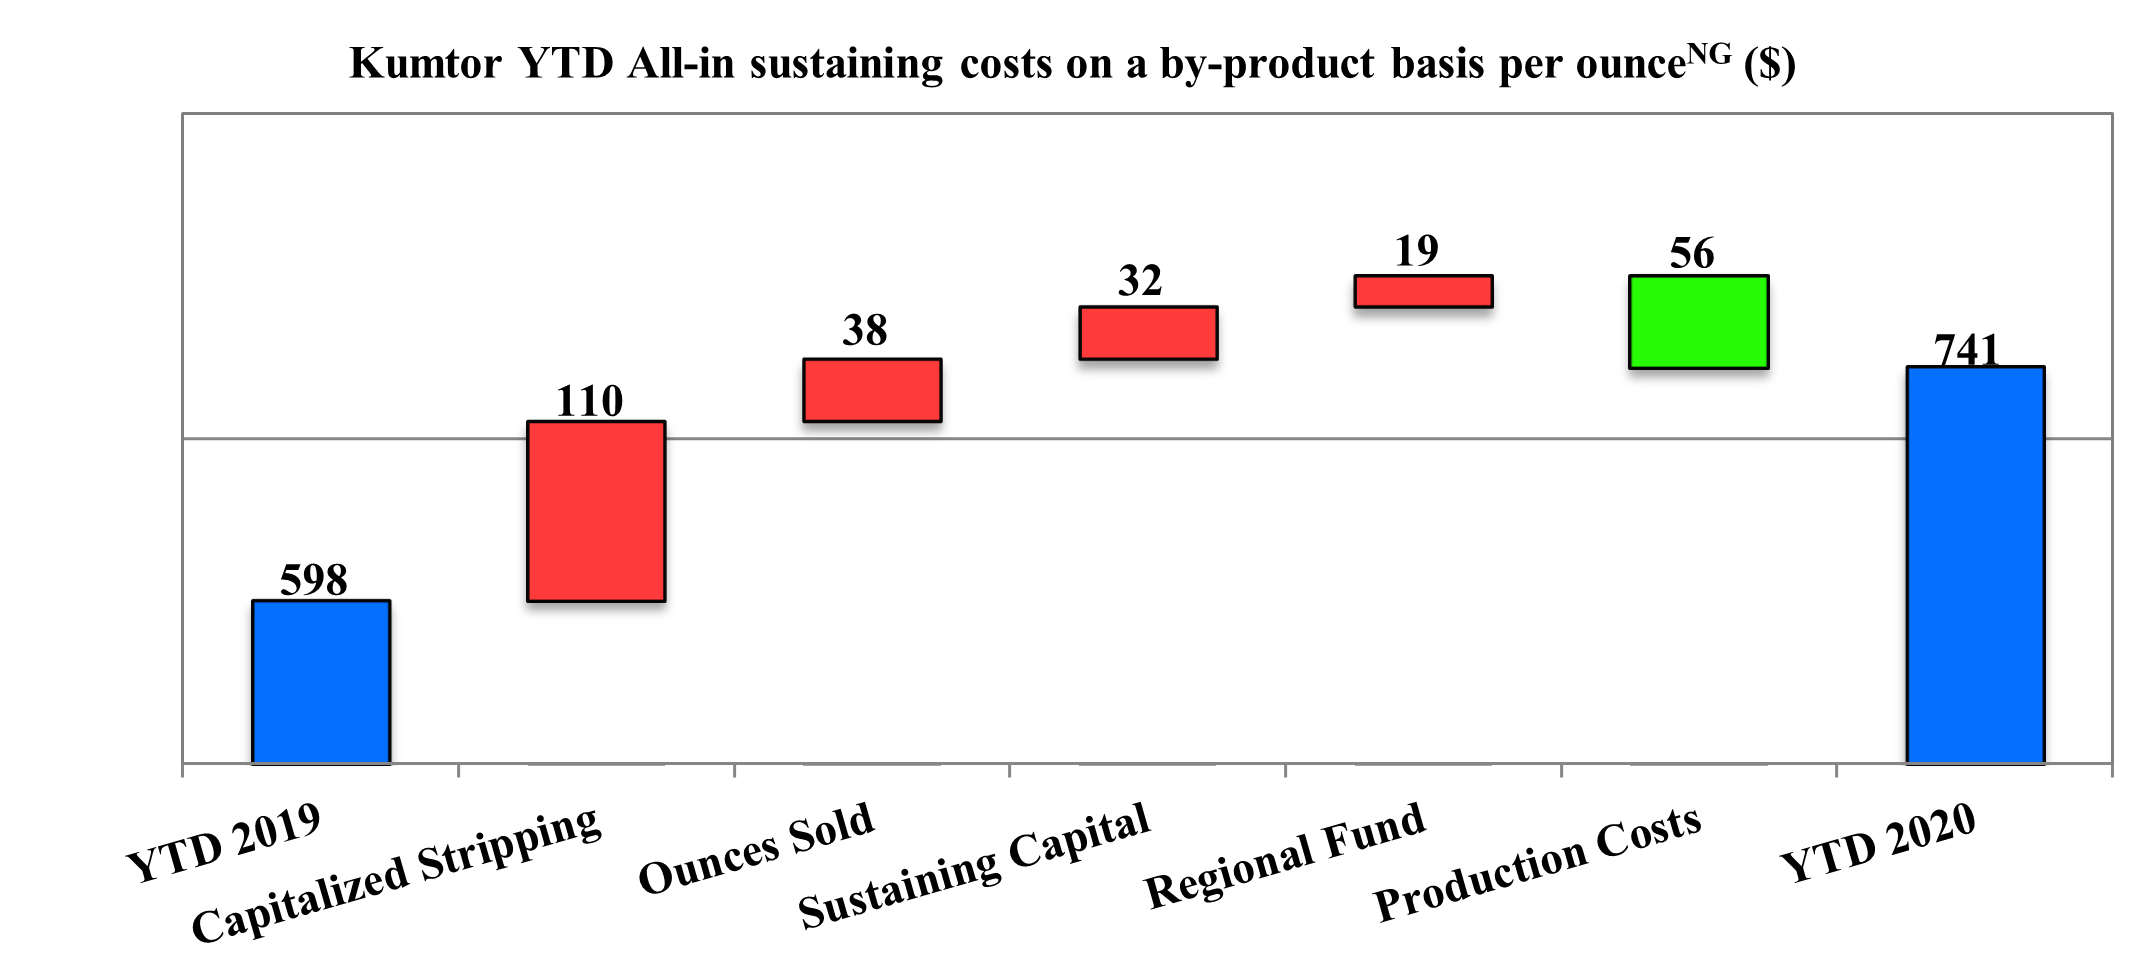 Kumtor YTD All-in sustaining costs on a by-product basis per ounce (Non-GAAP)($)